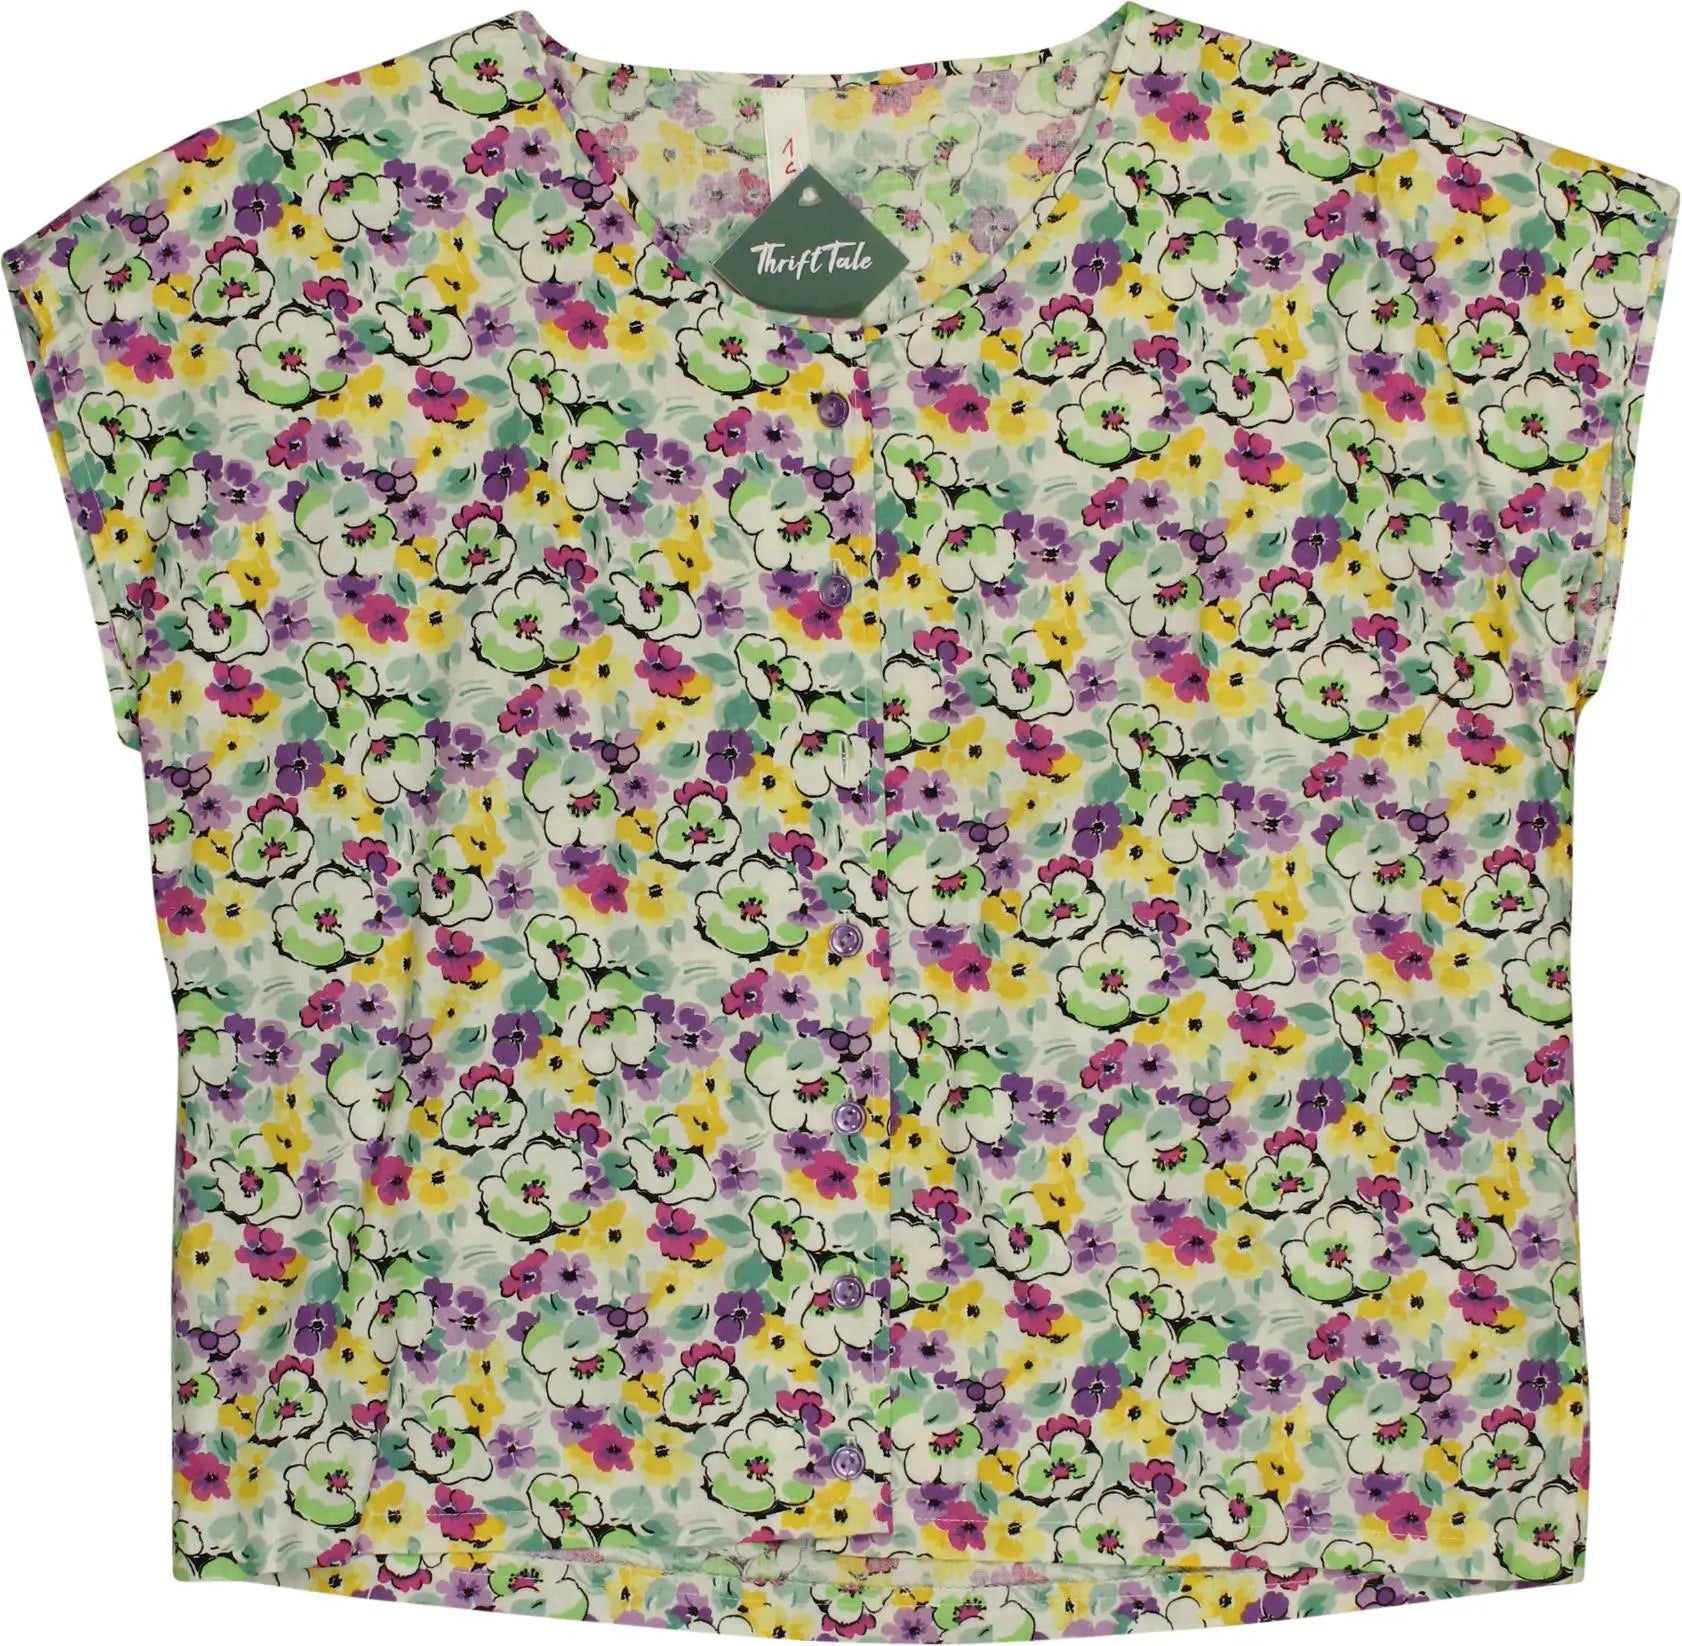 Handmade - 80s Handmade Floral Shirt- ThriftTale.com - Vintage and second handclothing